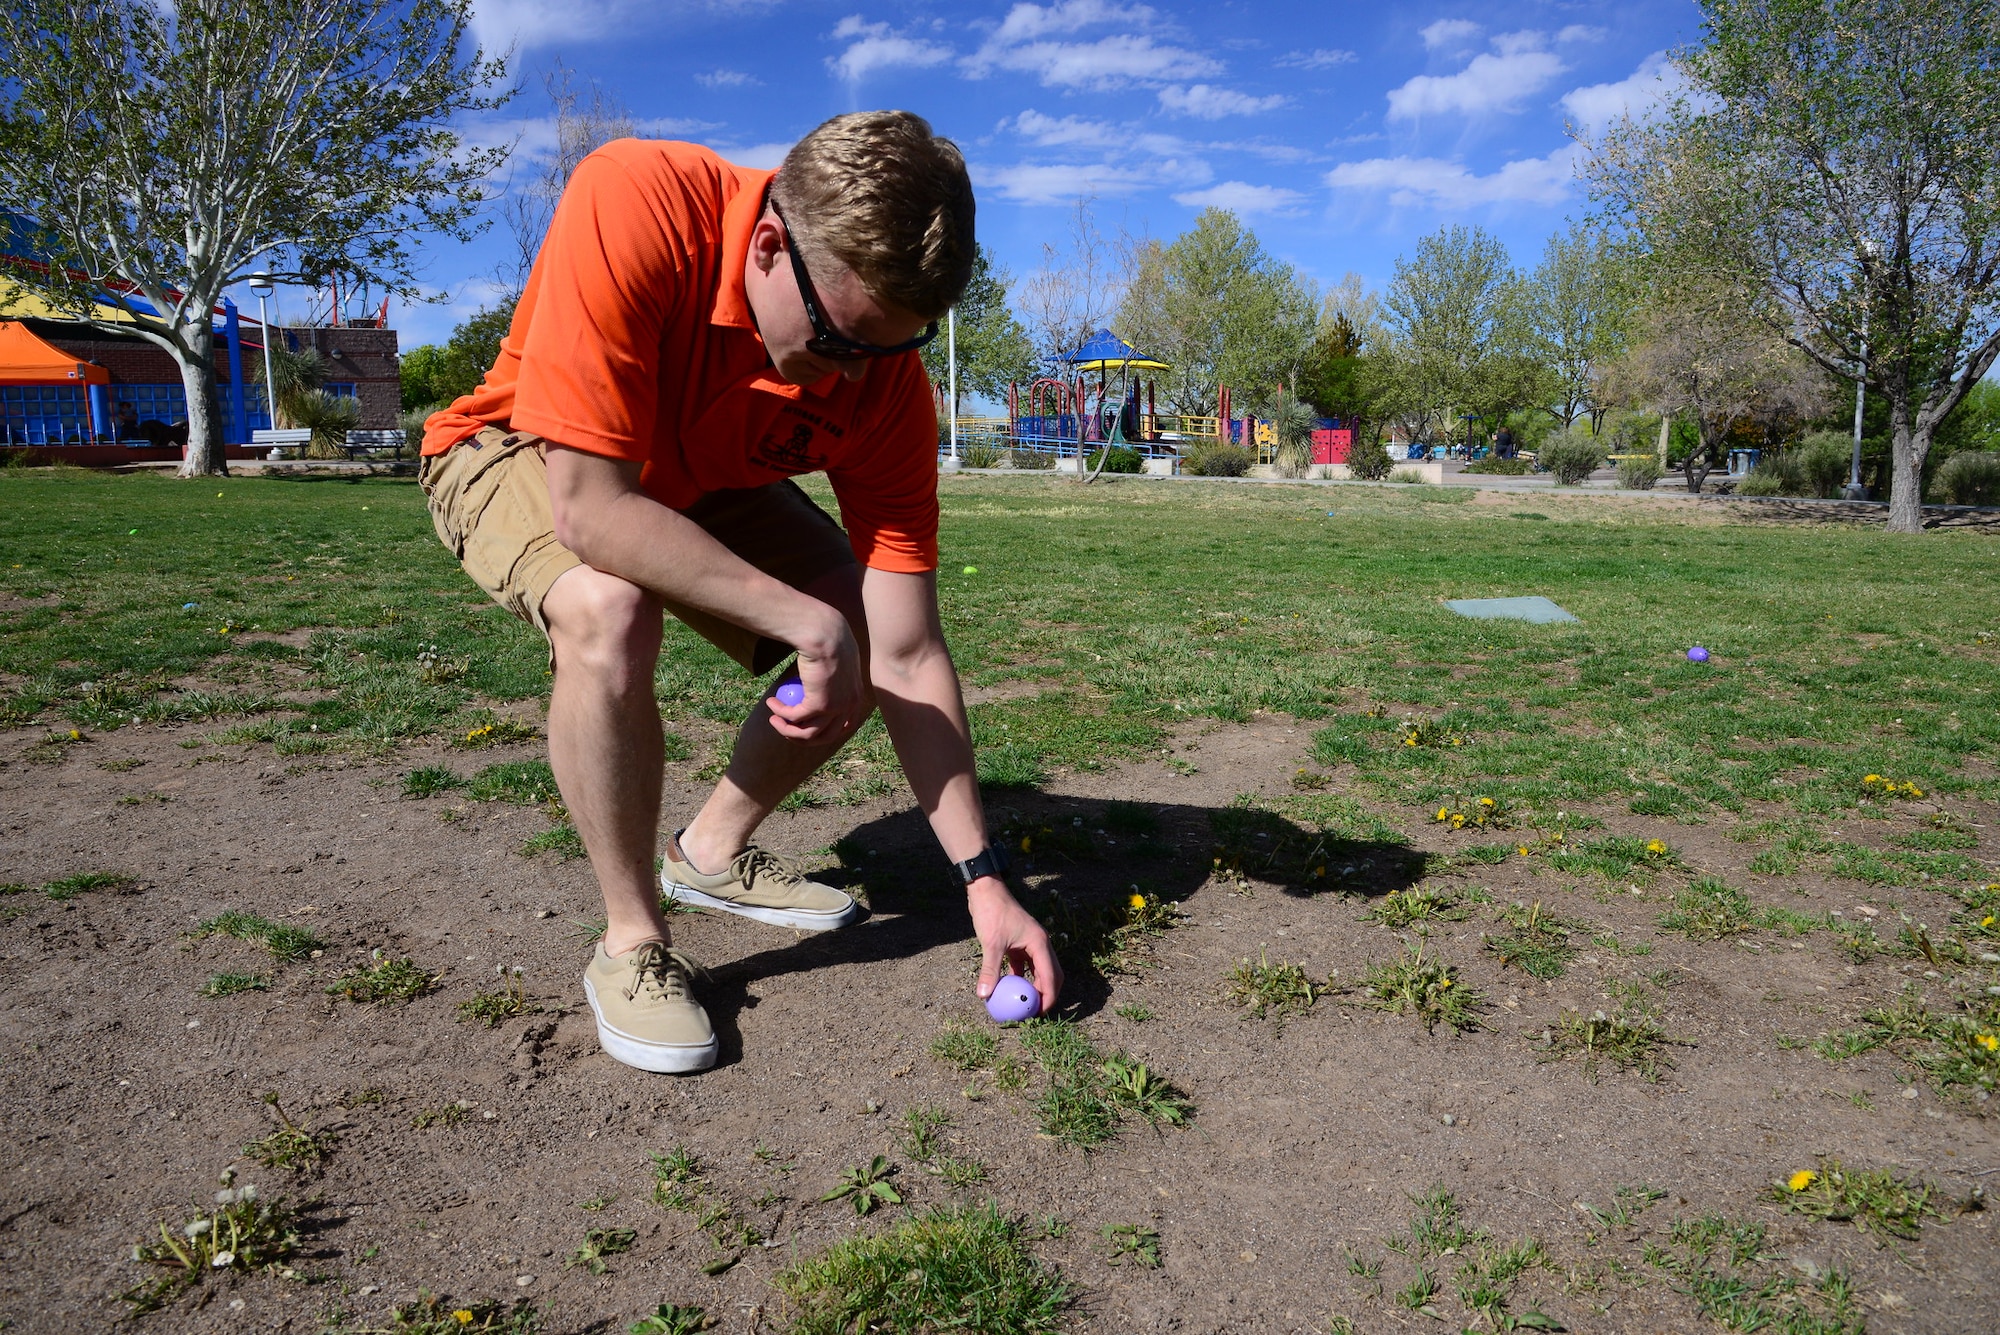 Airman 1st Class Jason Verhoef, 377th Explosive Ordnance Disposal, hides beeping Easter eggs during the third annual Beeping Easter Egg Hunt at Loma Linda Park in Albuquerque, NM, April 20, 2019. The eggs, made by EOD with a beeping mechanism, were hidden throughout the park for blind or impaired-vision children to find and trade in for candy and prizes. An EOD robot and suit were also on display for hands on exploration and questions. (U.S. Air Force video by Jessie Perkins)